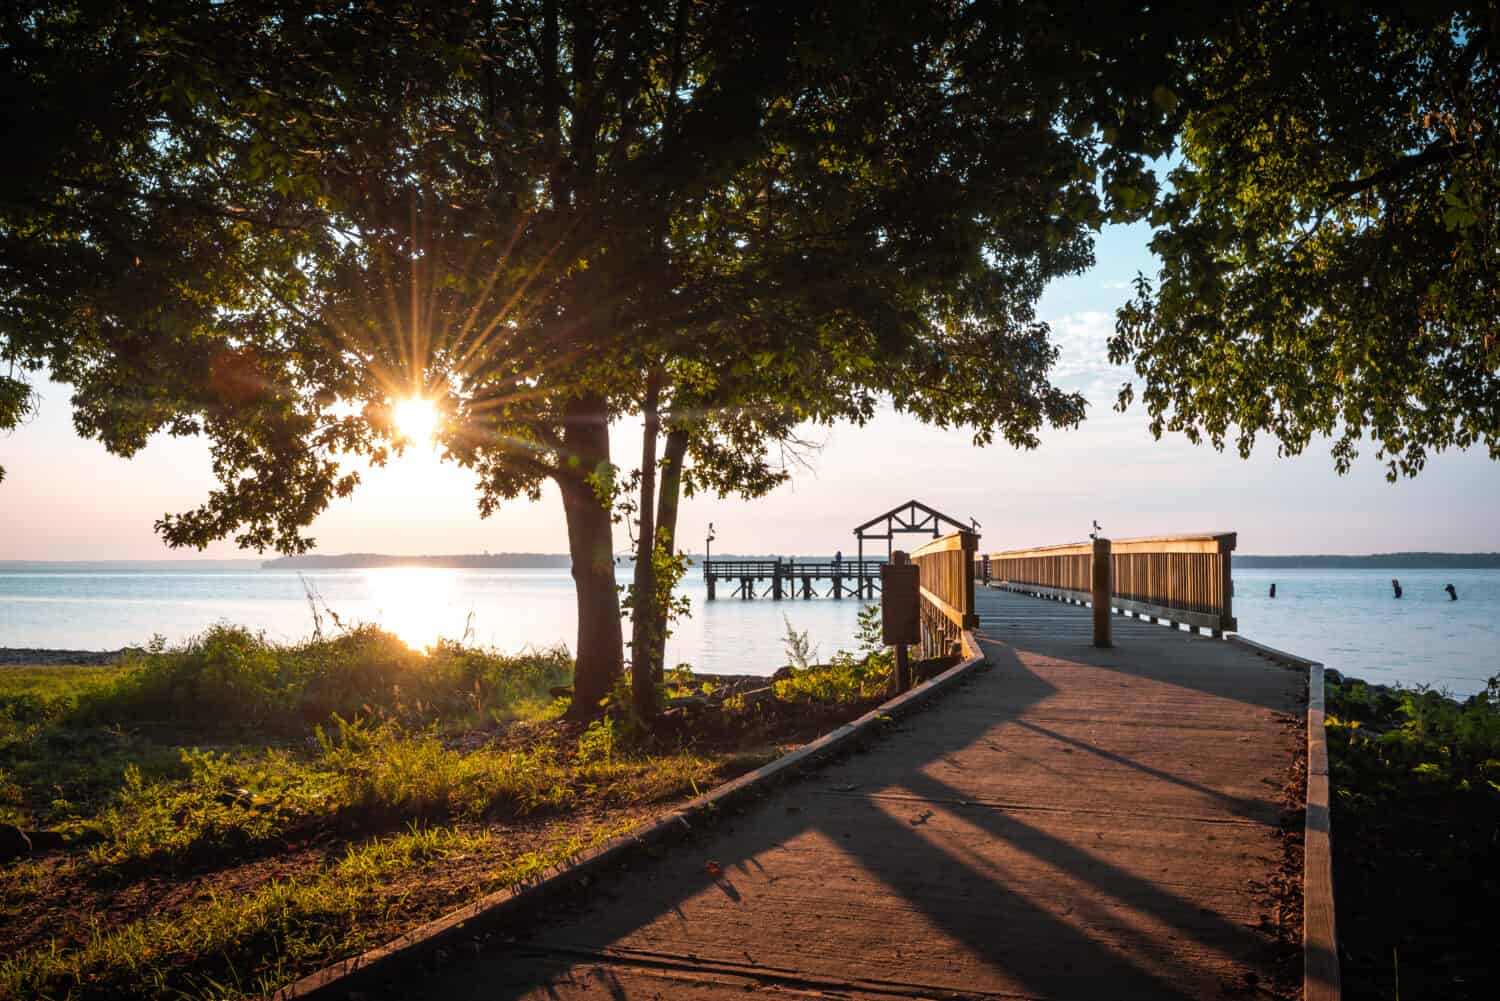 An early morning sun-star shining through the trees at the fishing pier of Leesylvania State Park in Virginia along the shores of the Potomac River.